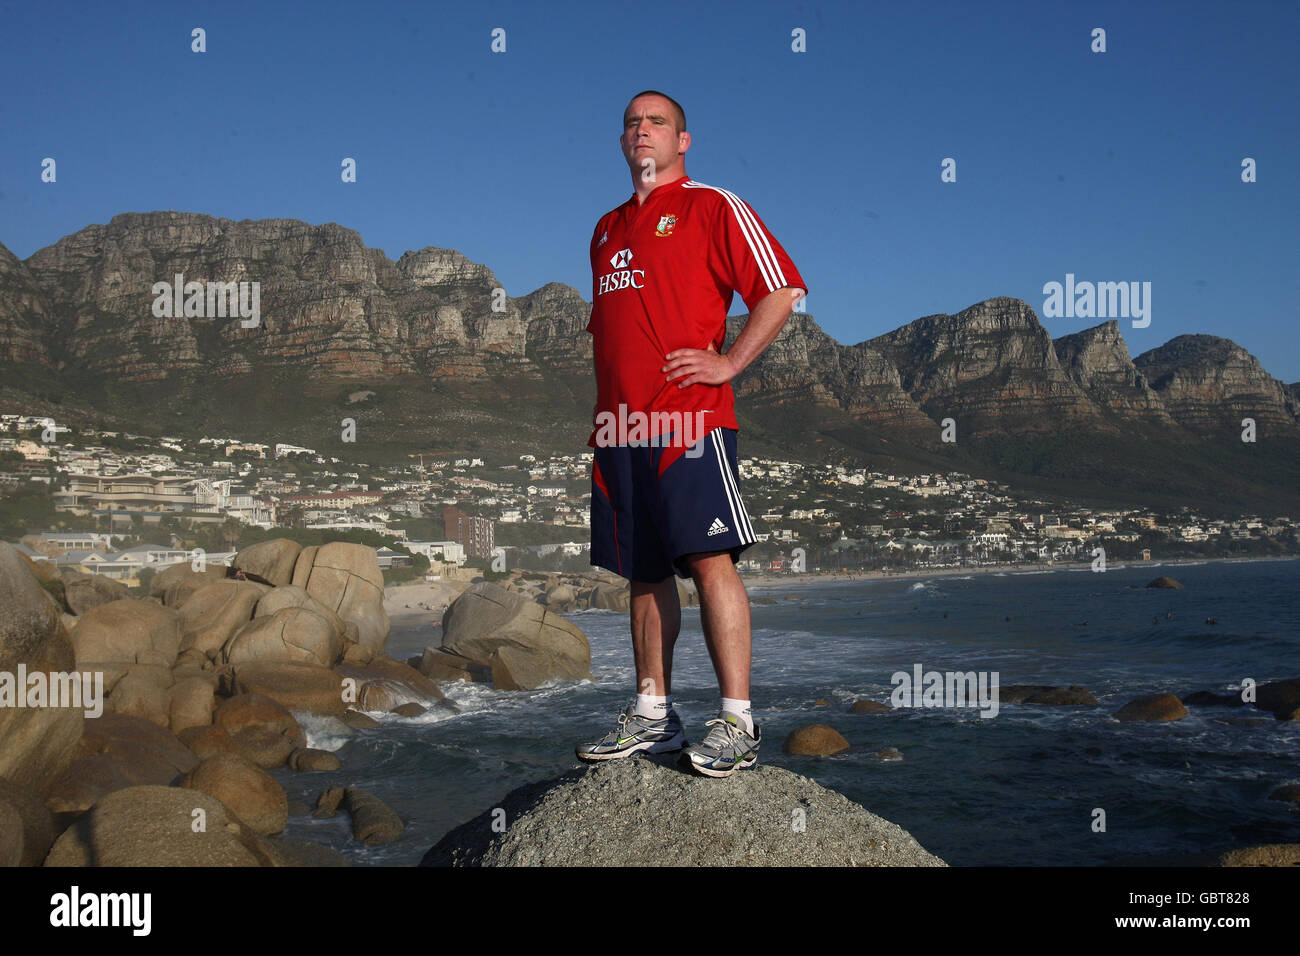 Rugby Union - British and Irish Lions Photocall - Camps Bay. British & Irish Lions' Phil Vickery poses for a picture in Camps Bay, Cape Town, South Africa. Stock Photo